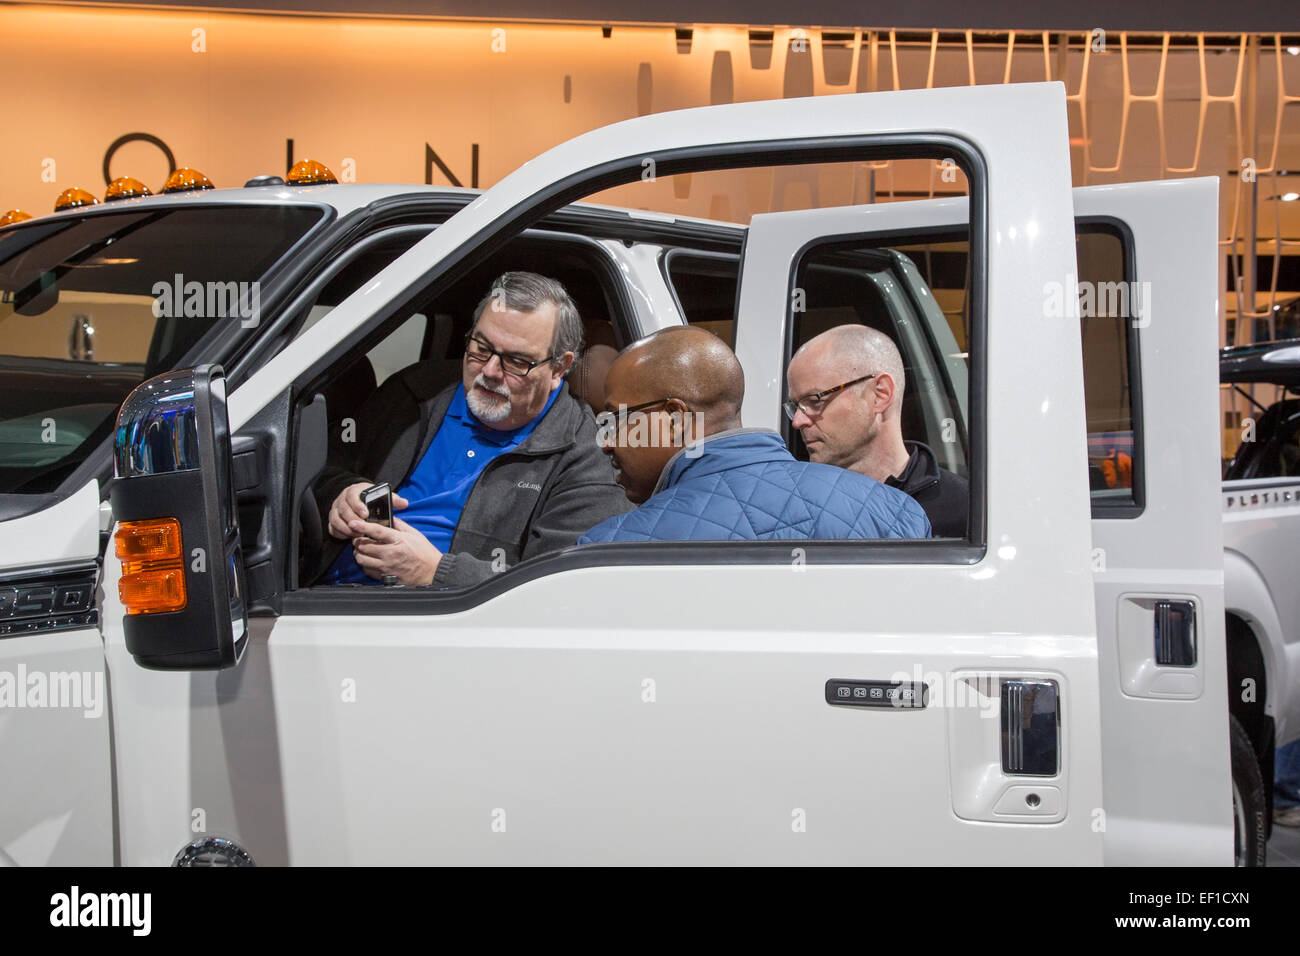 Detroit, Michigan - Visitors to the North American International Auto Show inspect the Ford F-350 Super Duty truck. Stock Photo